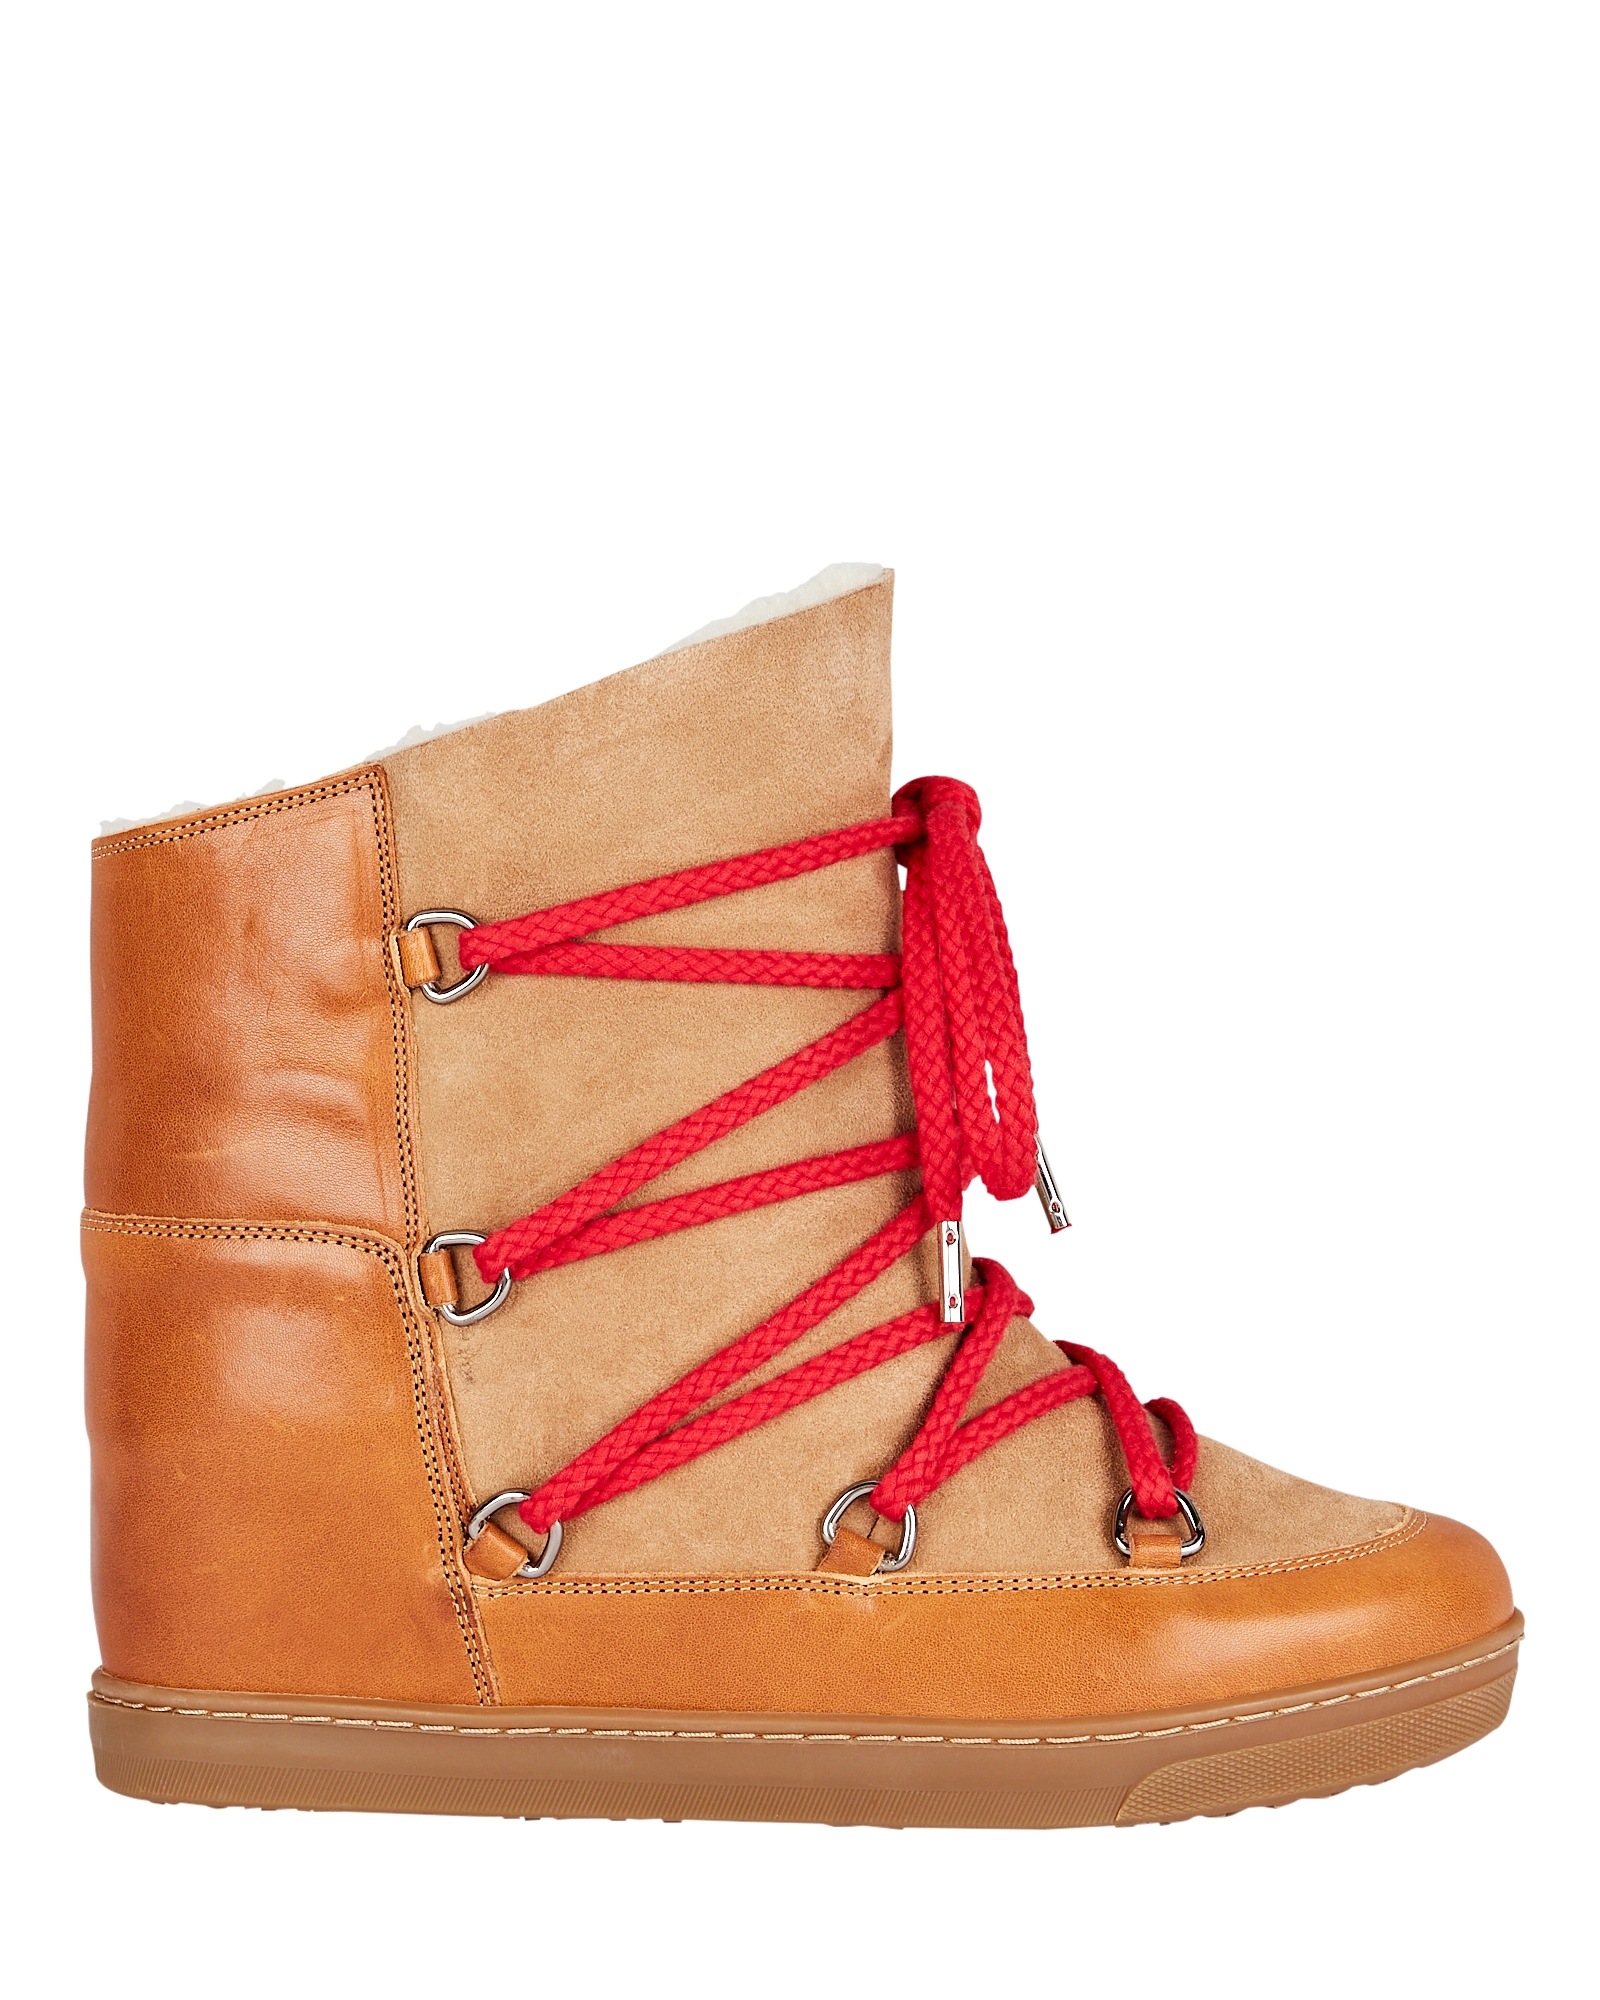 Isabel Marant Nowles Shearling Booties | INTERMIX®